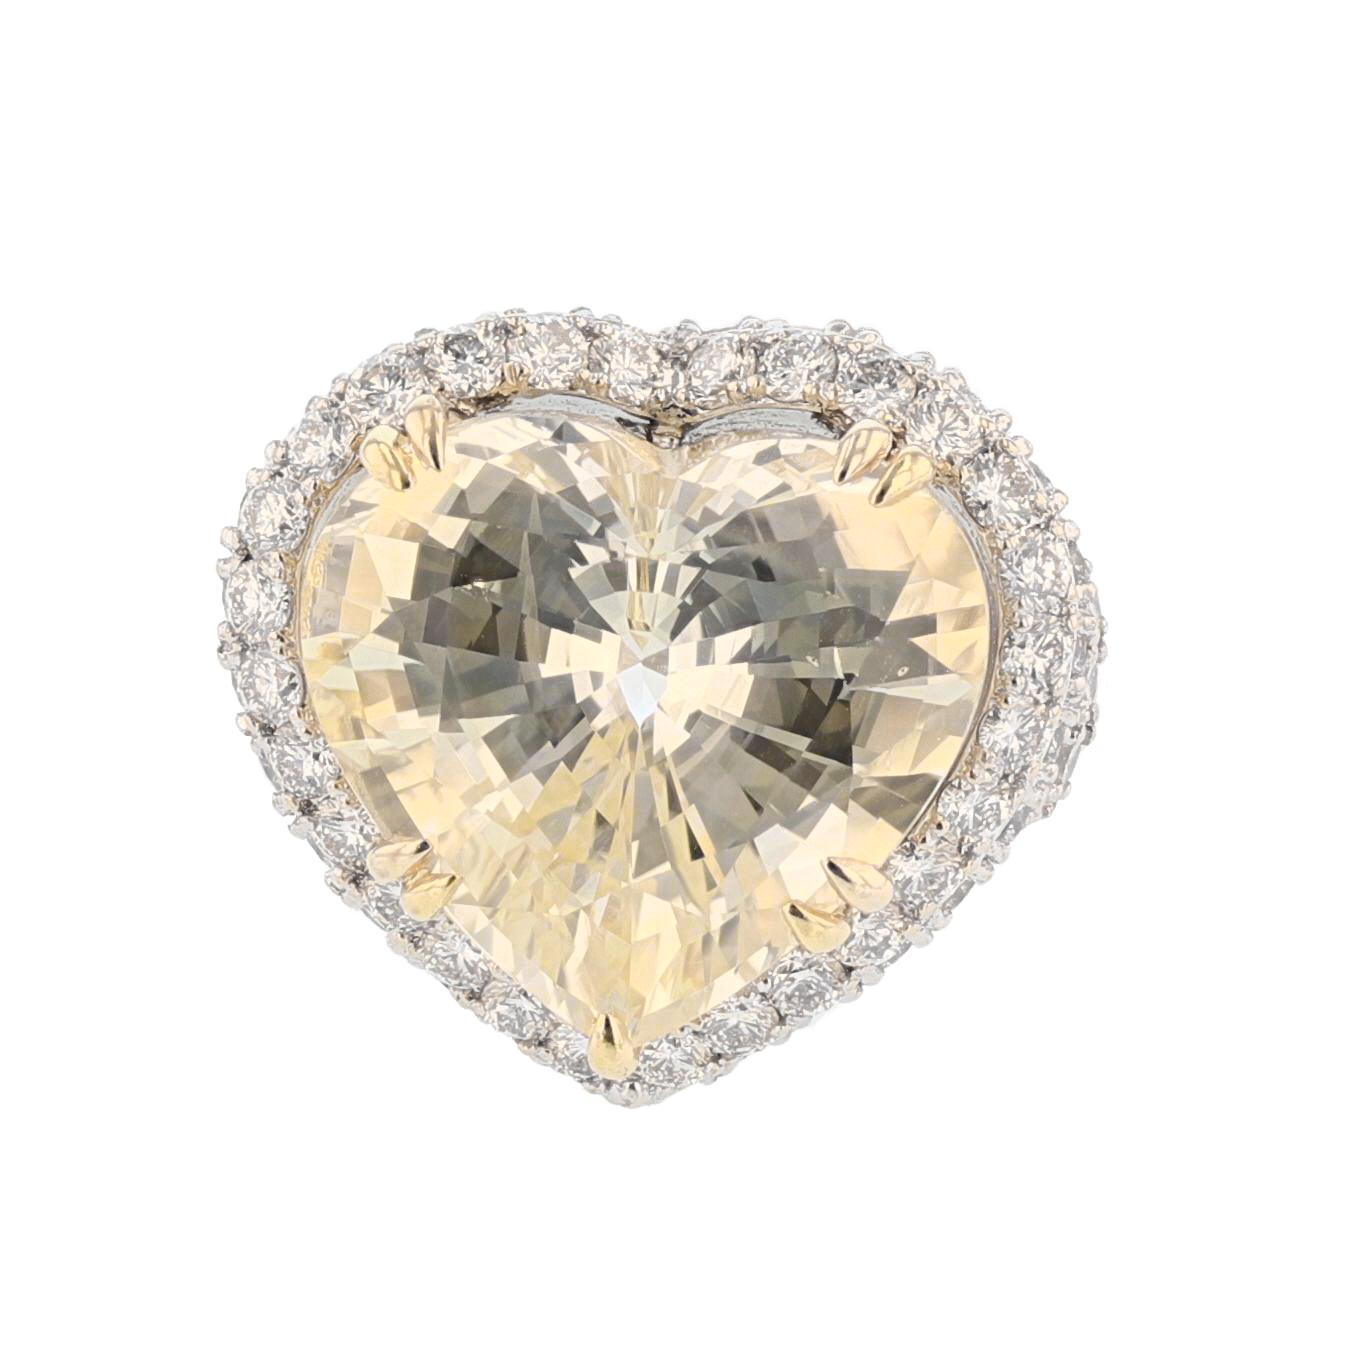 This ring is made in 14K white and yellow gold featuring a heart shape, No Heat, GIA certified, Ceylon yellow sapphire weighing 20.49 CT. The certificate number is 